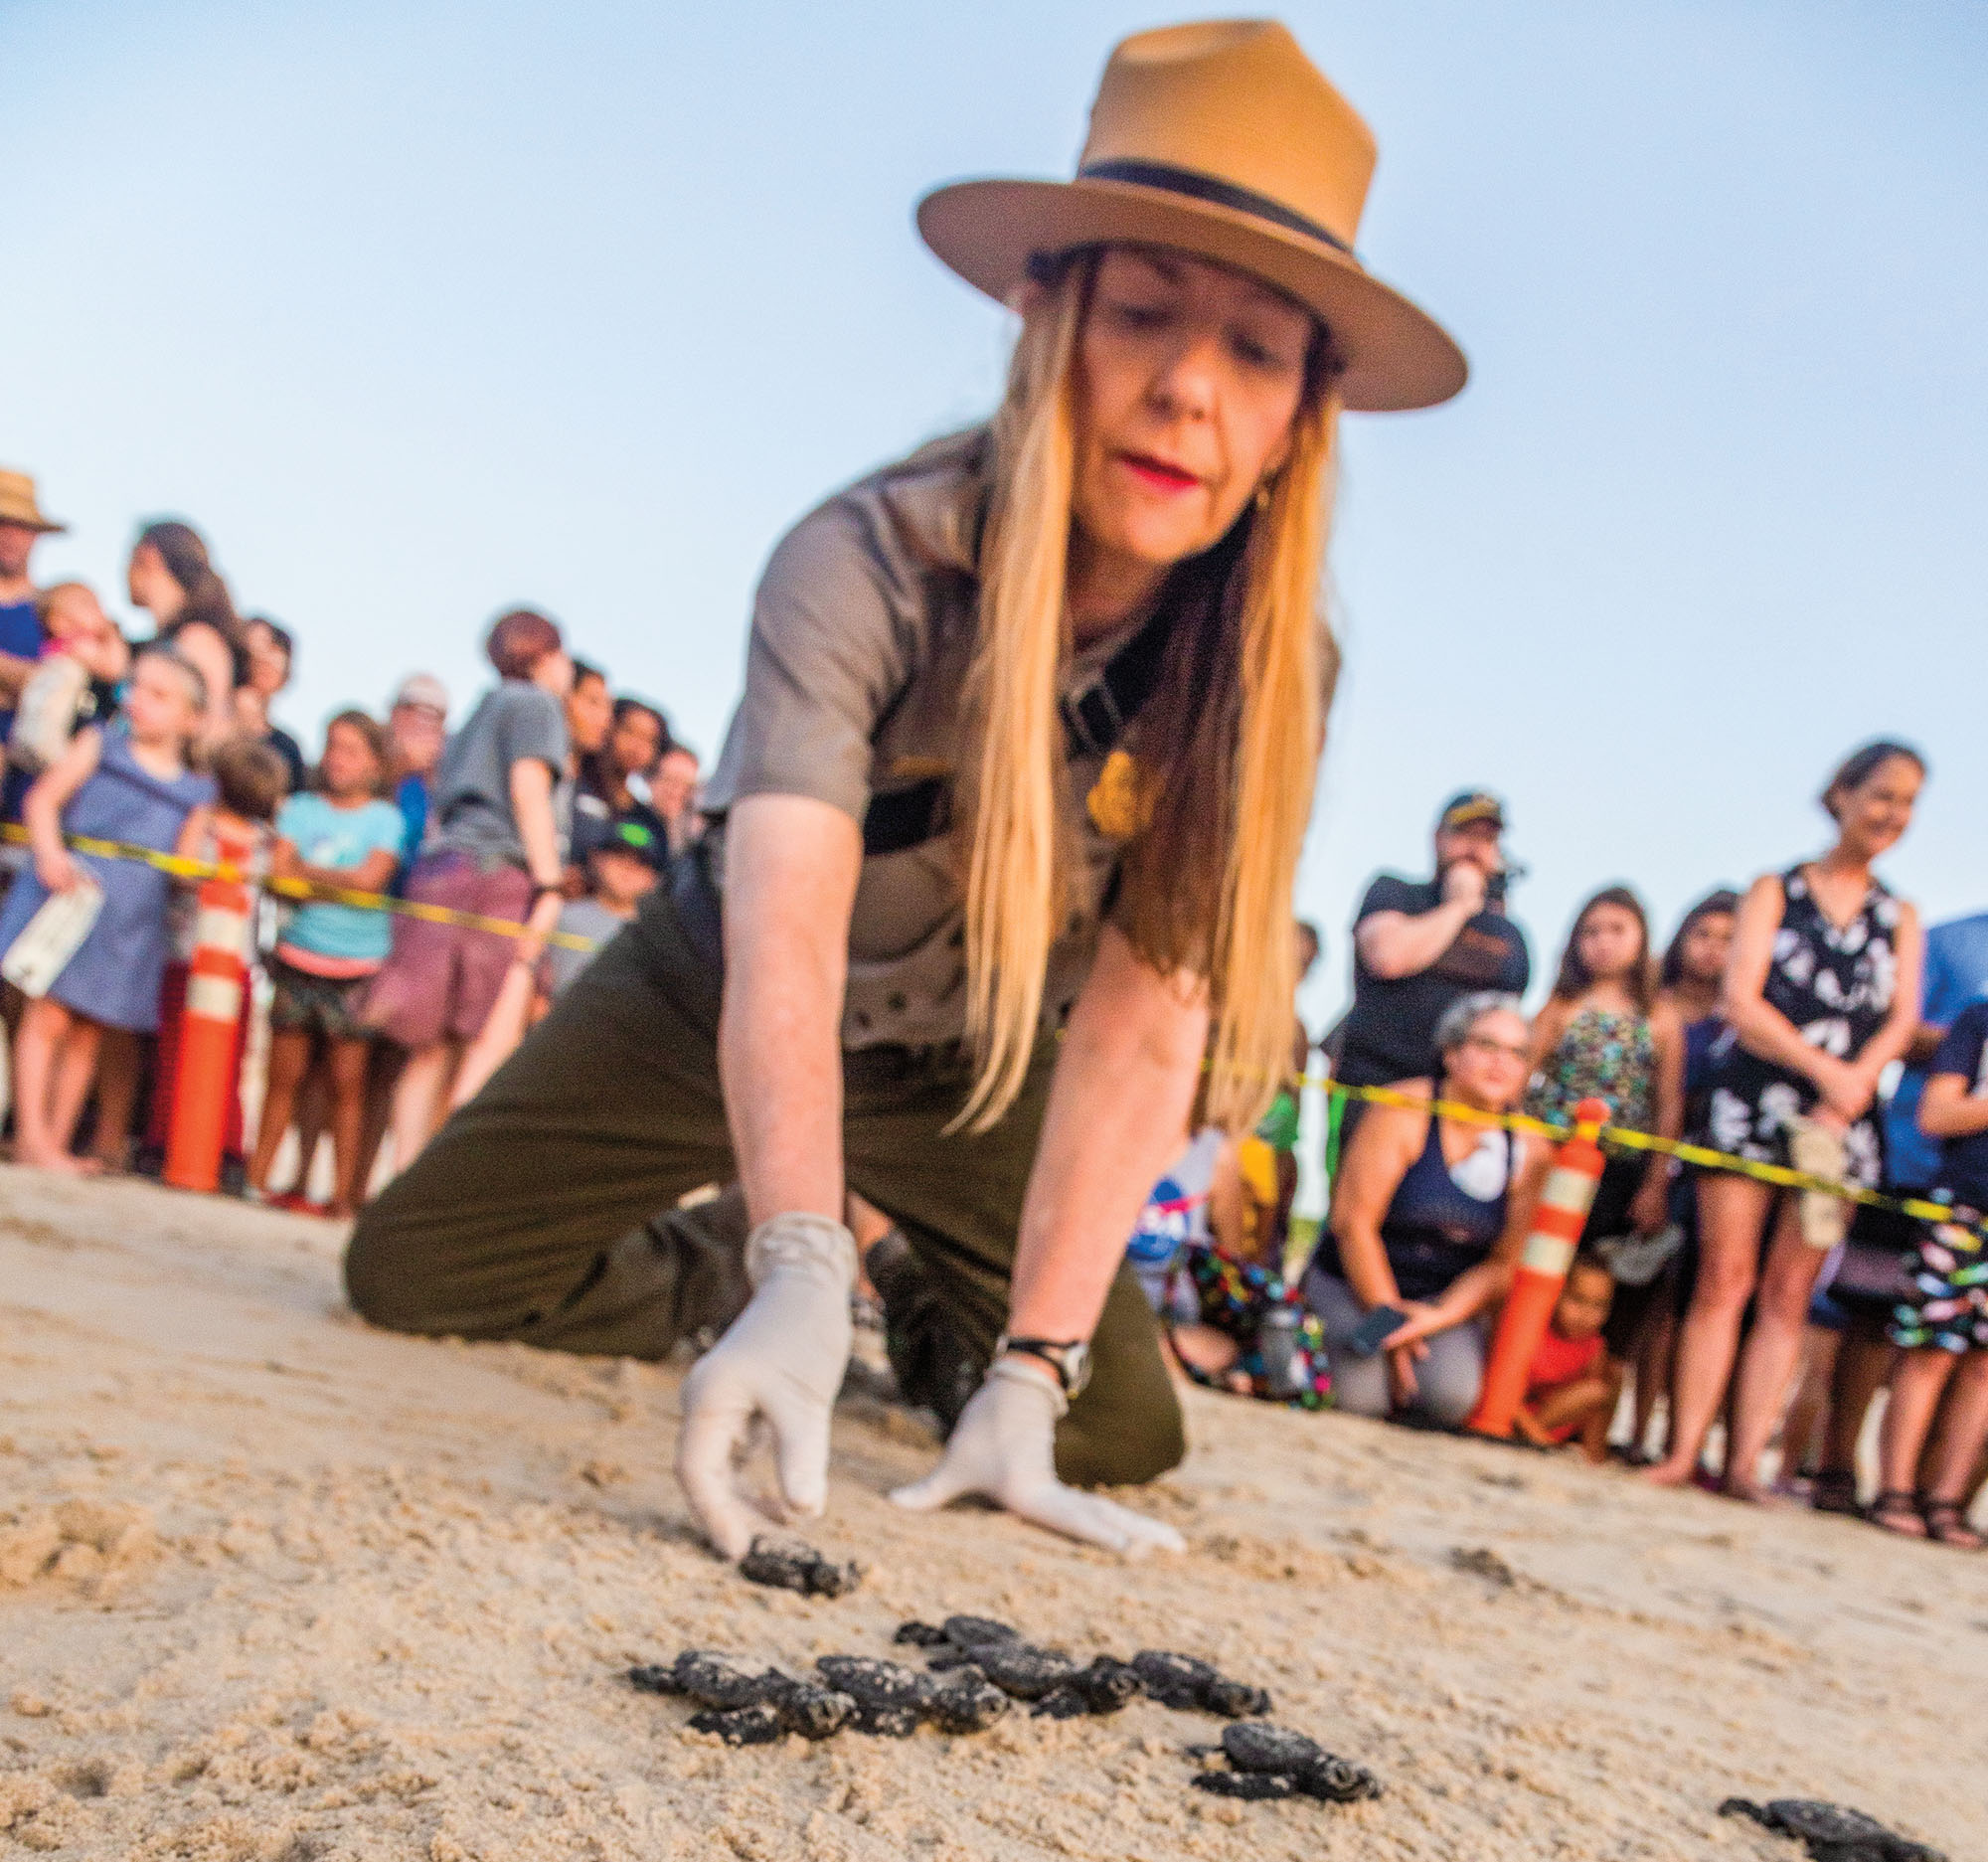 A National Parks Service ranger kneels in the sand handling small turtles